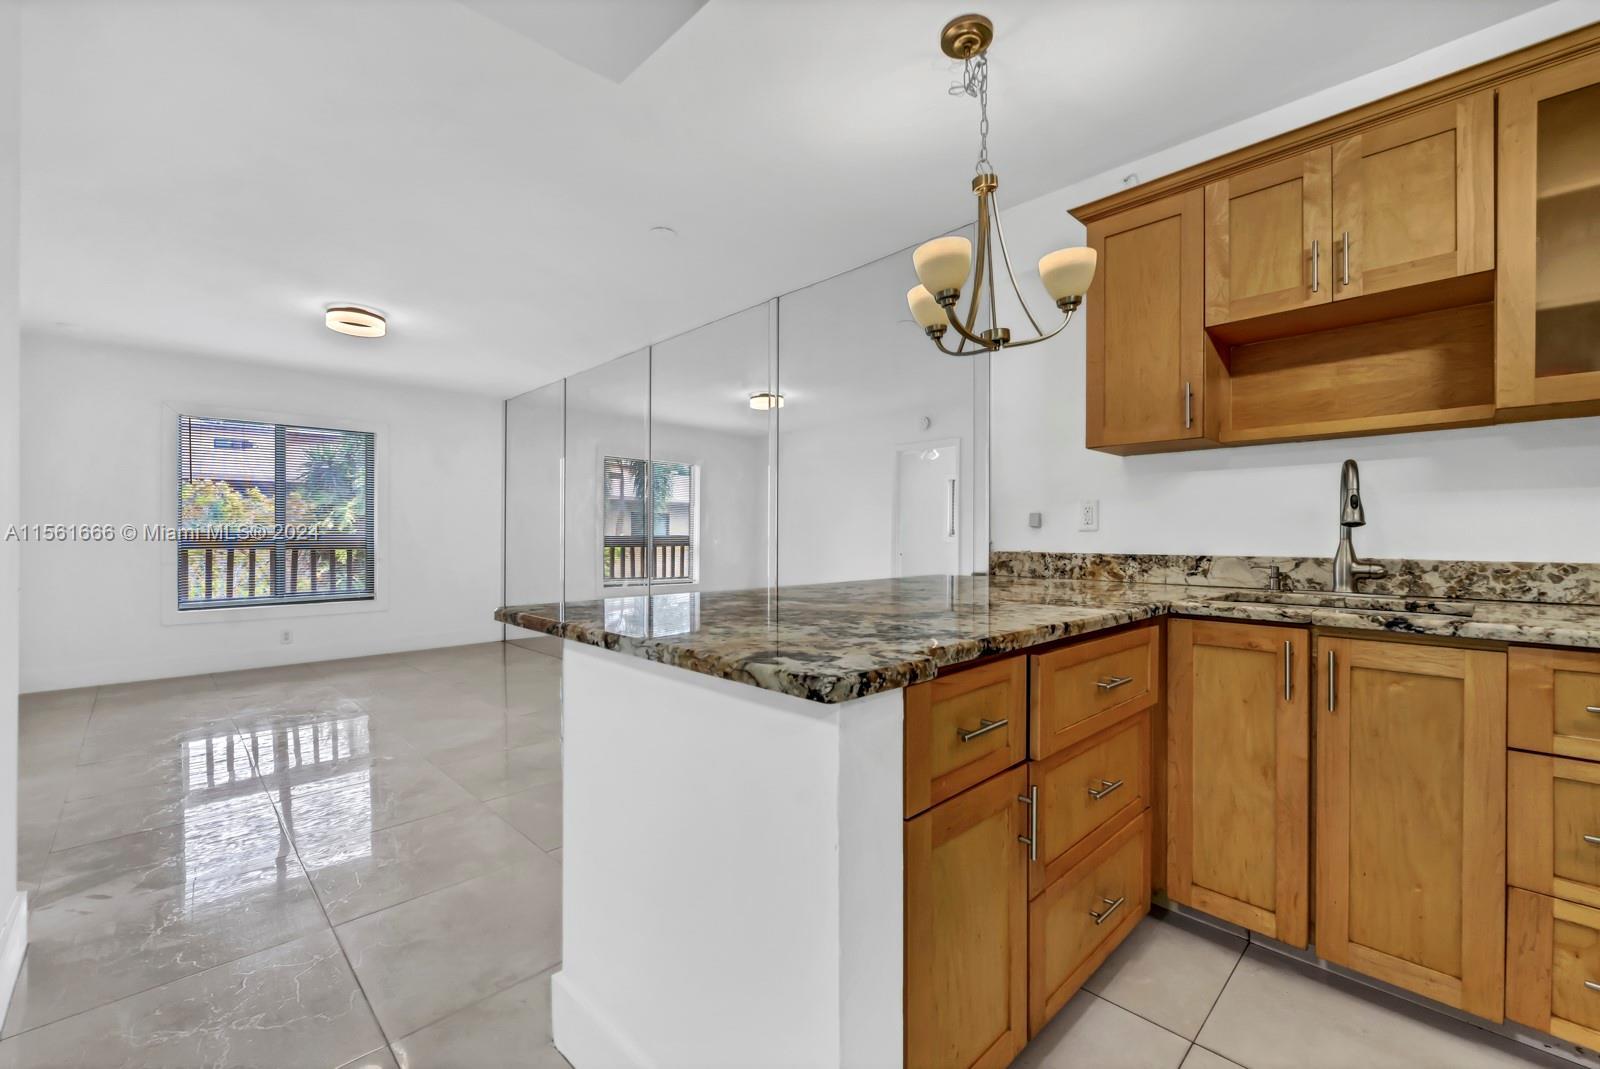 This condominium is a fantastic find! Located between Wilton Drive and Oakland Park's downtown enter